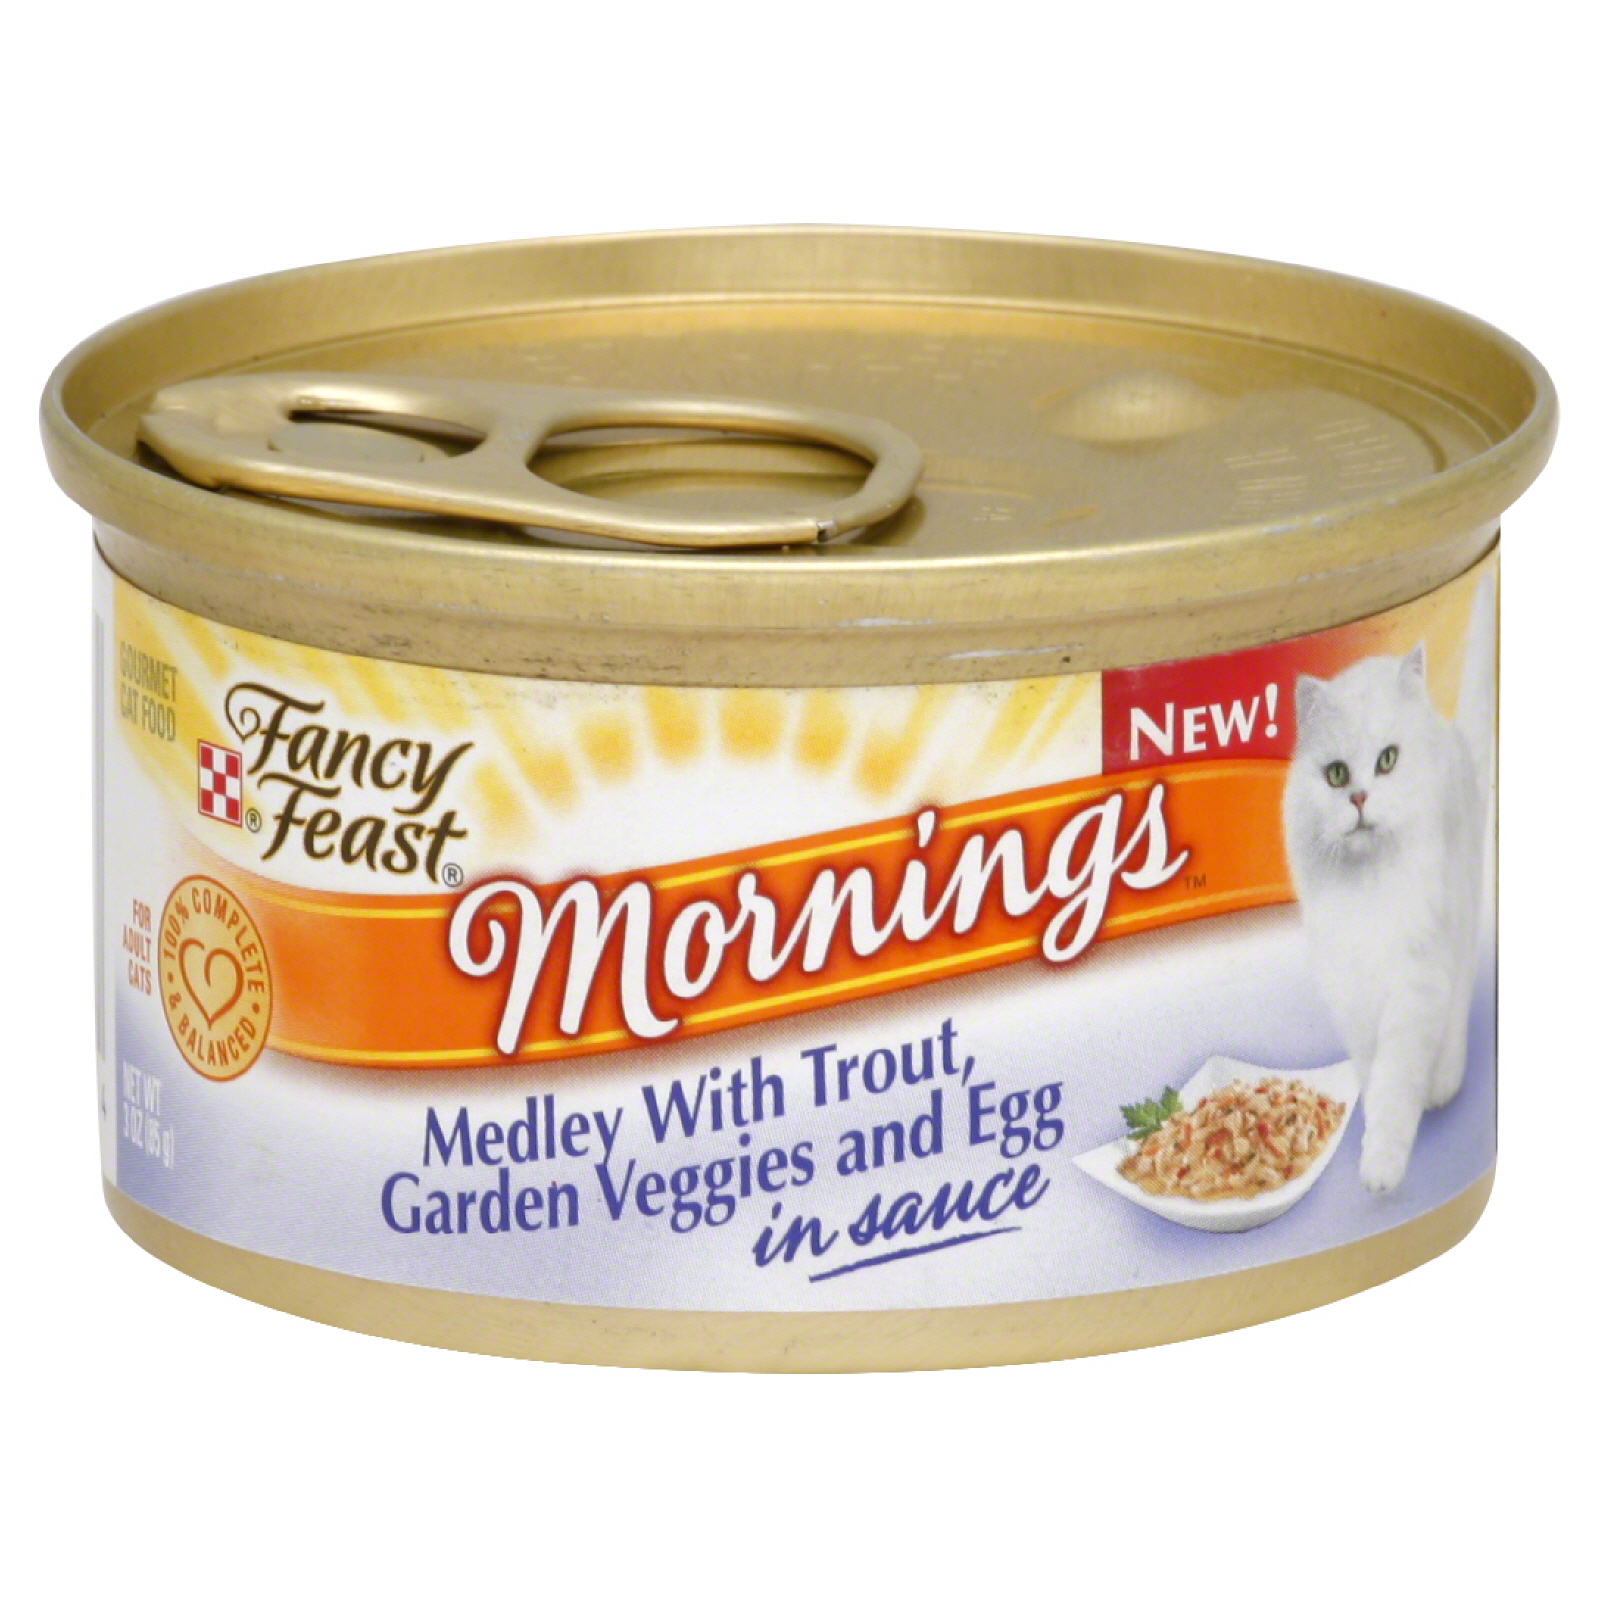 Purina Fancy Feast Mornings Medley with Trout, Garden Veggies & Egg in Sauce Gourmet Cat Food, 3 Oz.